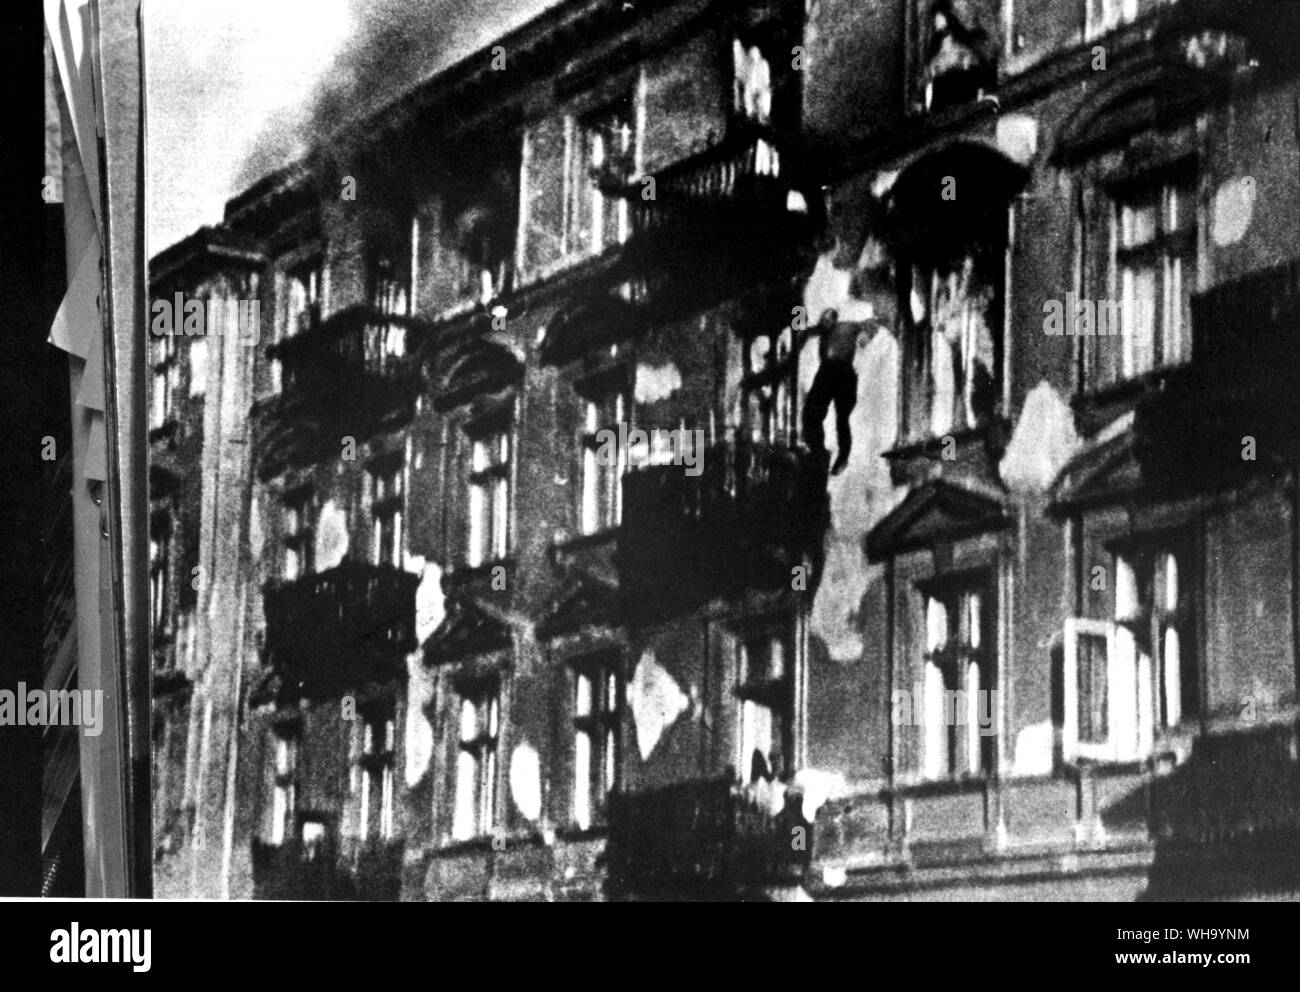 WW2: People leaping from burning houses. Stock Photo